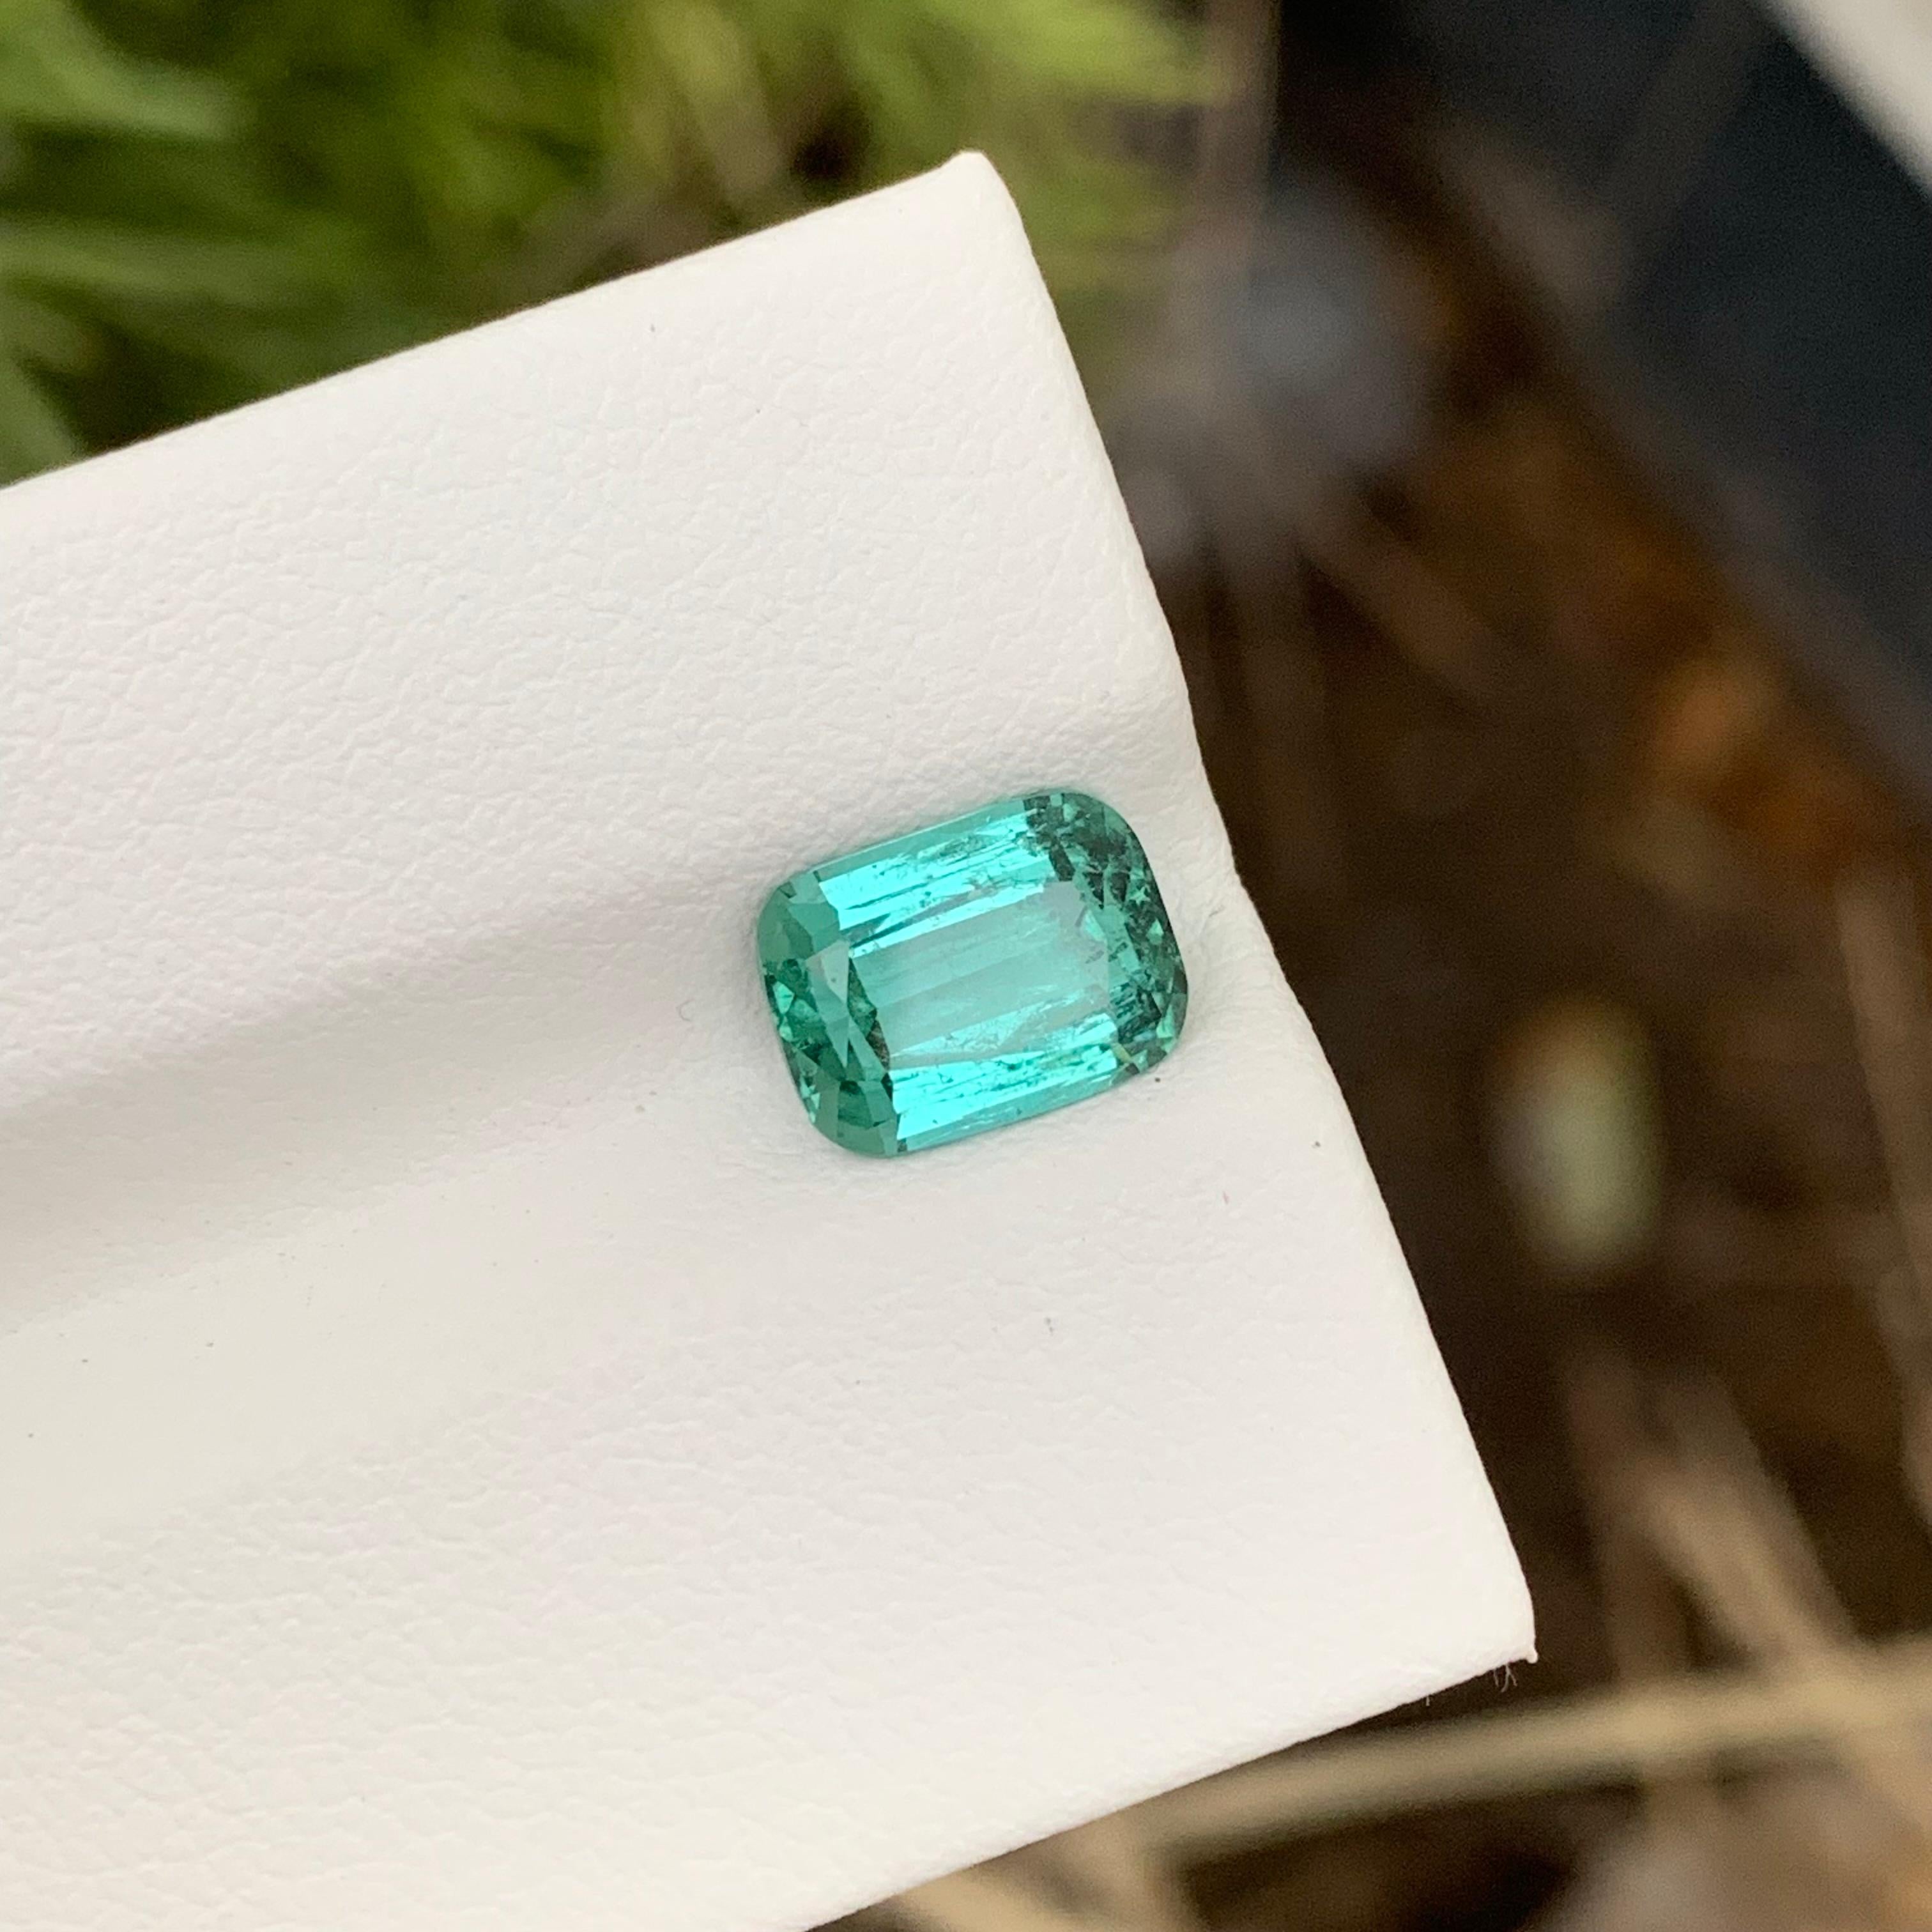 Loose Bluish Green Tourmaline 
Weight: 2.10 Carats
Dimension: 8.8 x 6.6 x 4.4 Mm 
Treatment: Non
Certificate: On Demand
Shape: Cushion 
Origin: Afghanistan 

Tourmaline, a gemstone of remarkable diversity, graces the world of jewelry with its